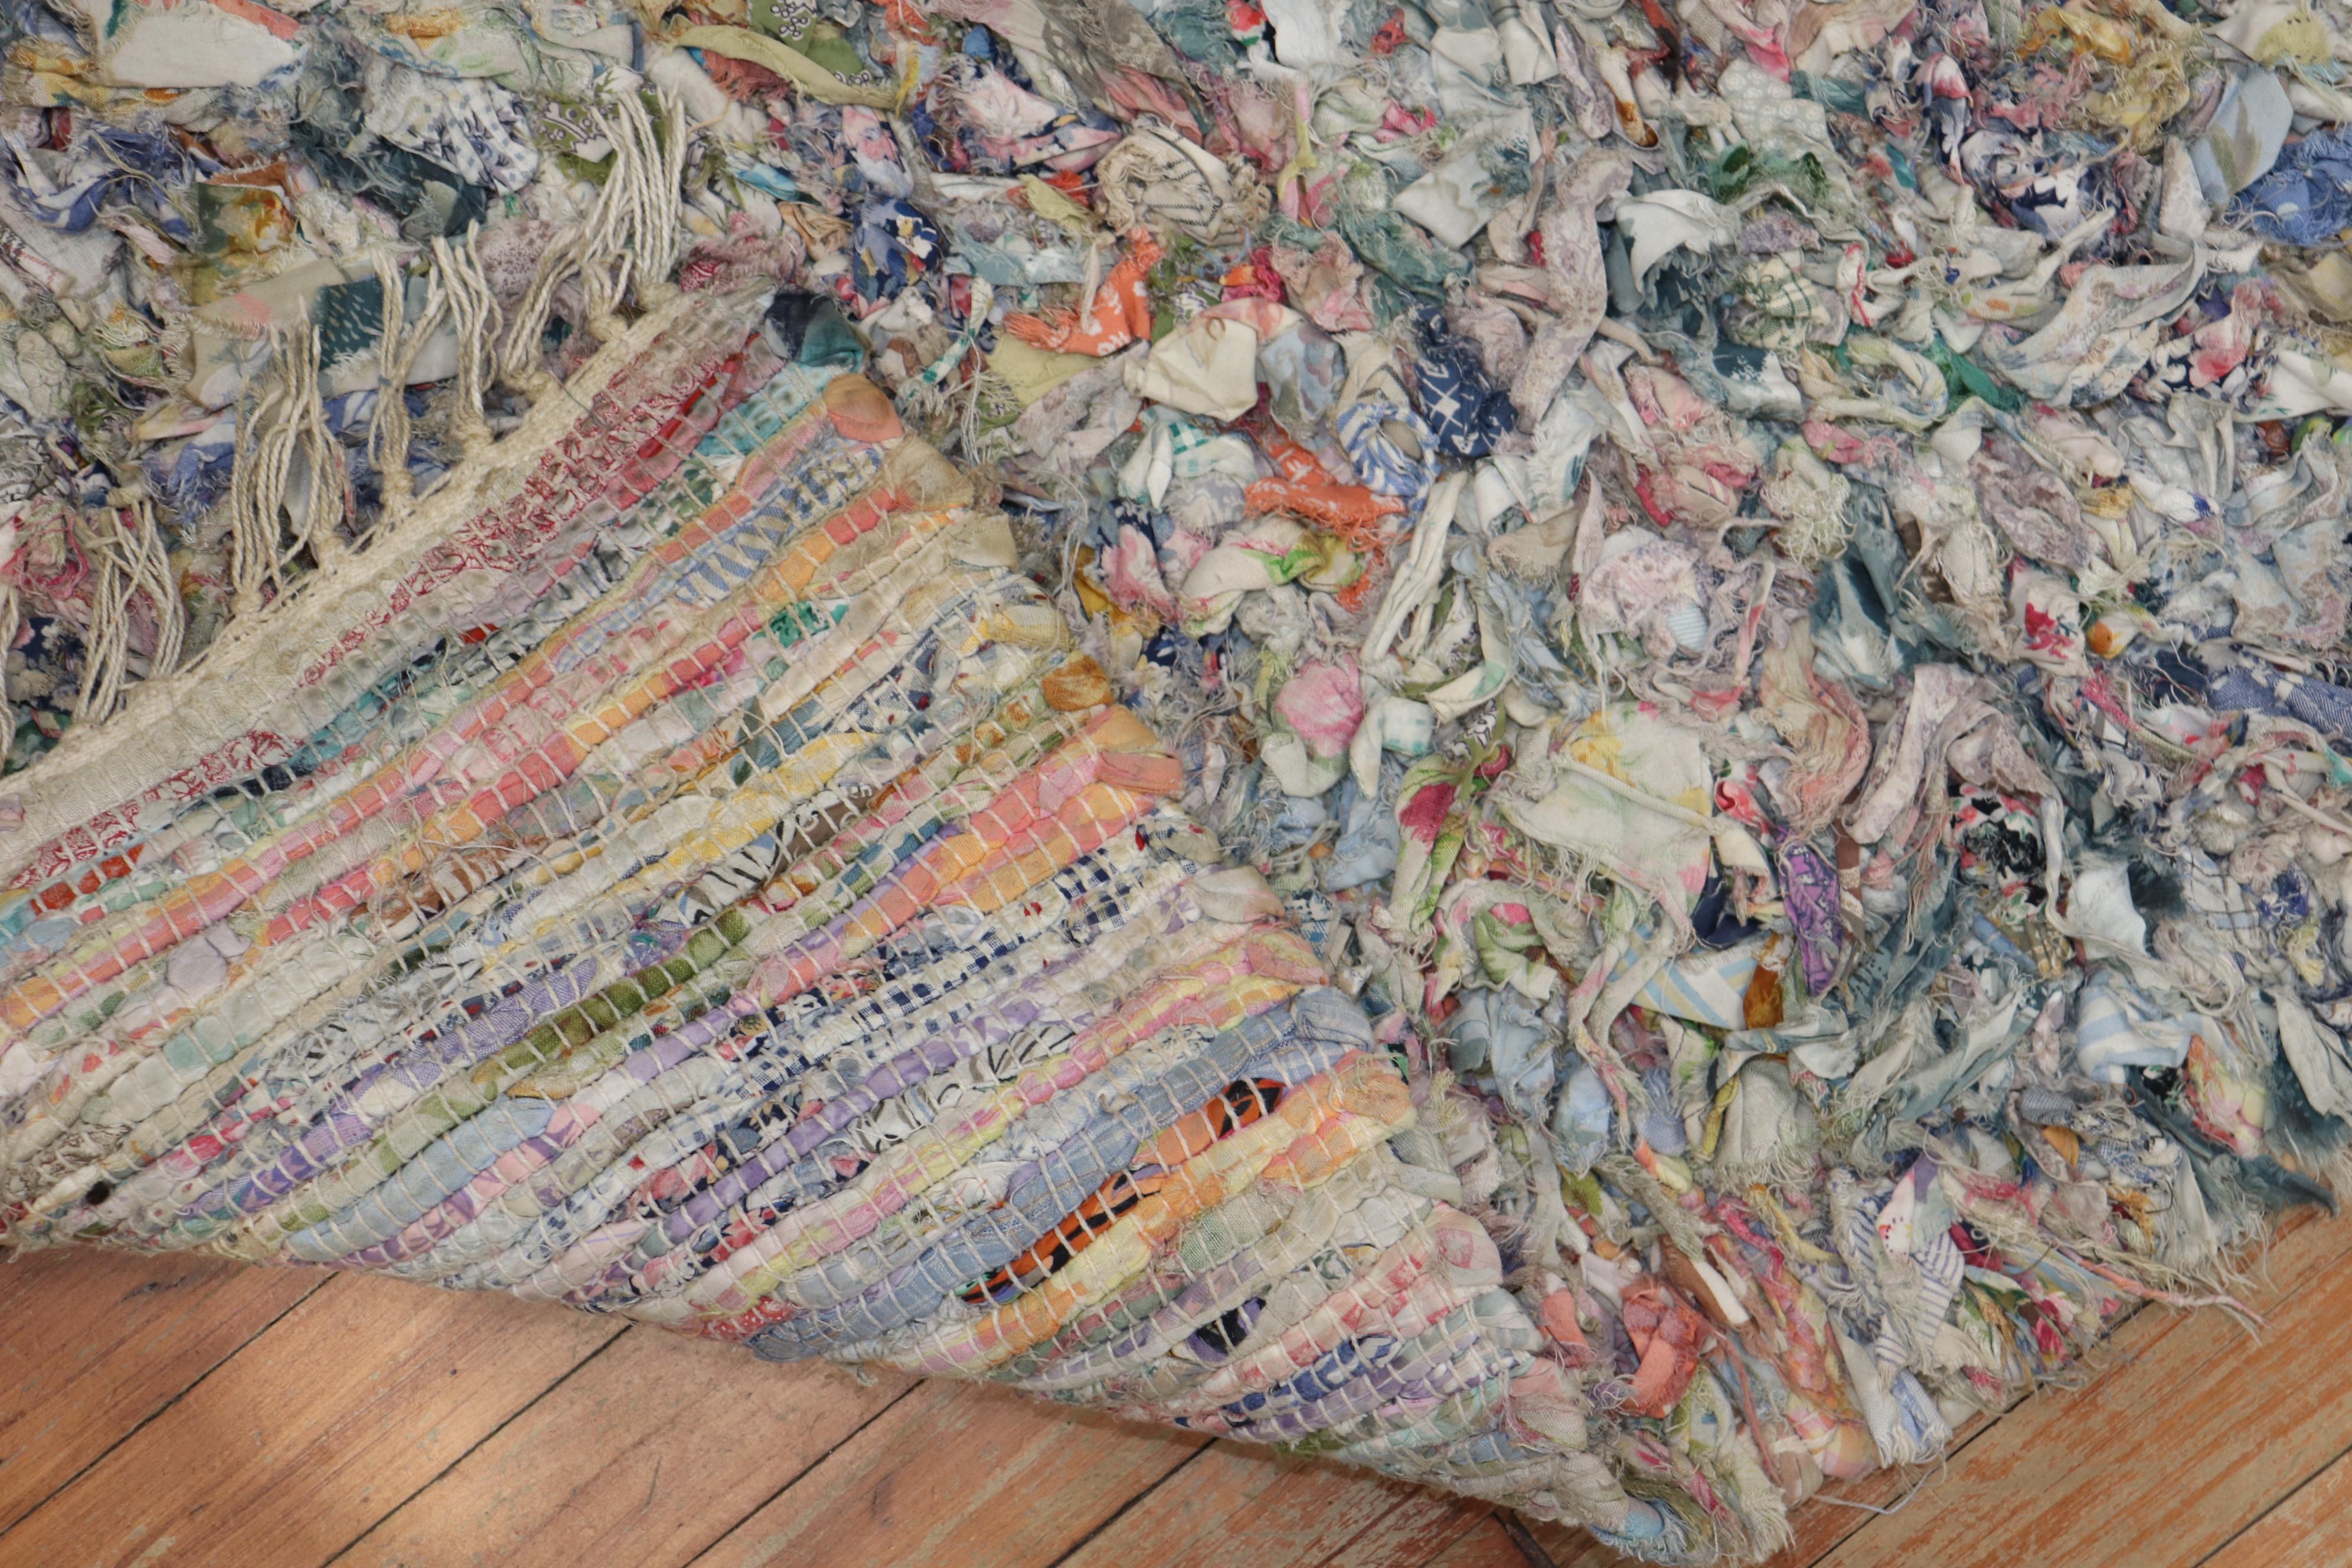 One of a kind American Braid throw size rug from the late 20th century with a borderless confetti pattern

Measures: 2'2'' x 3'3''

American Braided rugs provided a way for people to make use of fabrics from other worn goods (clothing, storage